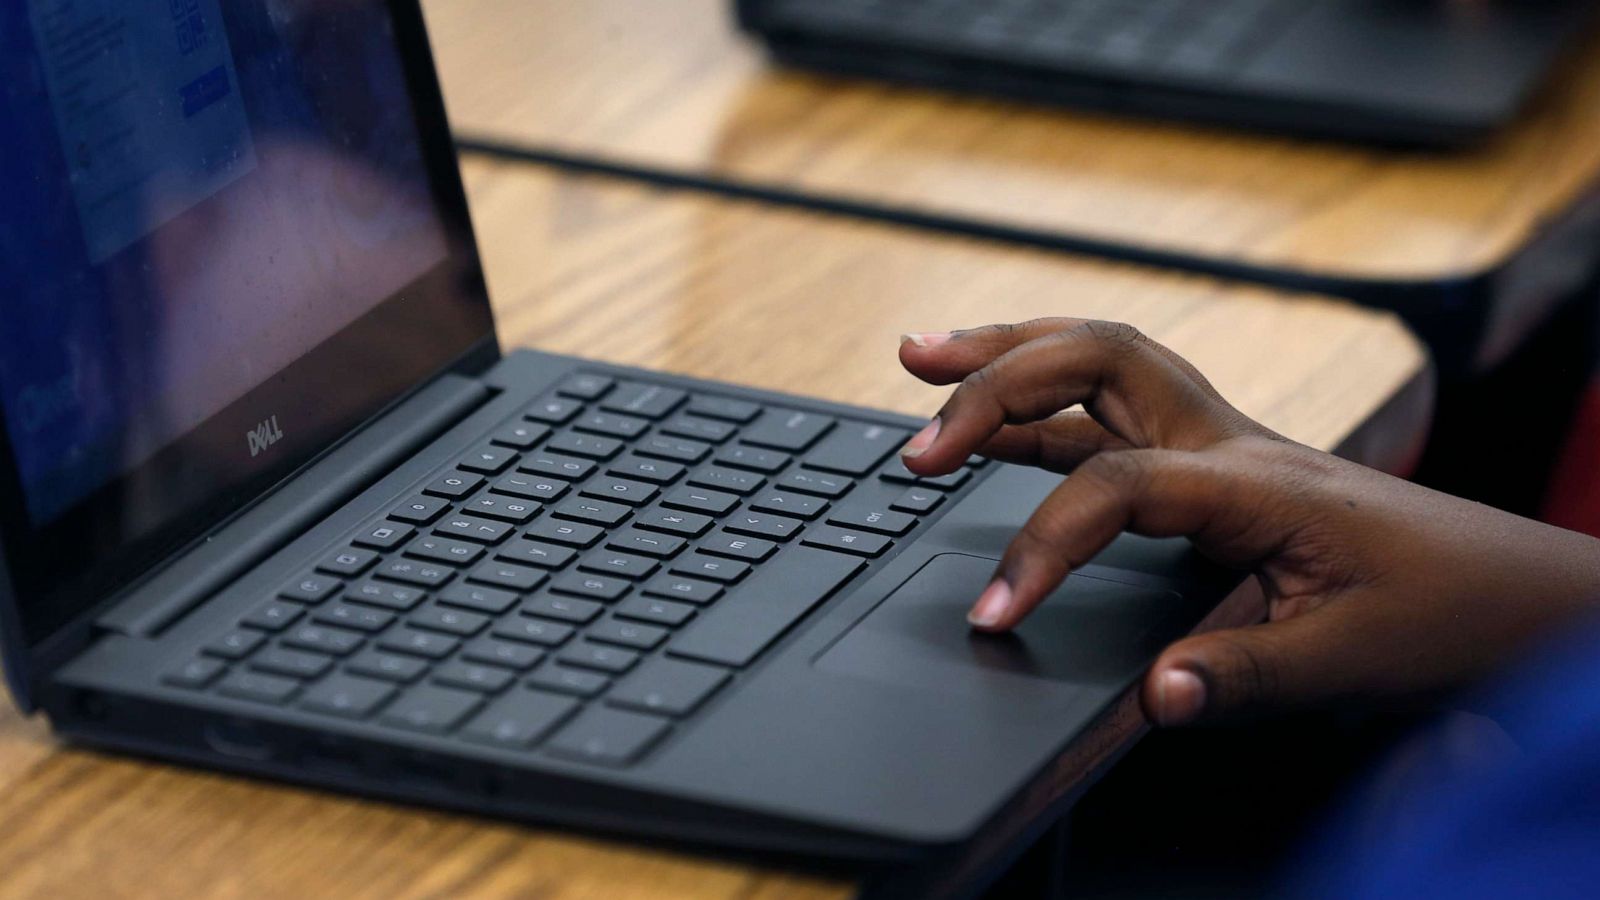 Google's Chromebooks thrive in US classrooms but generate waste, costs,  critics say - ABC News